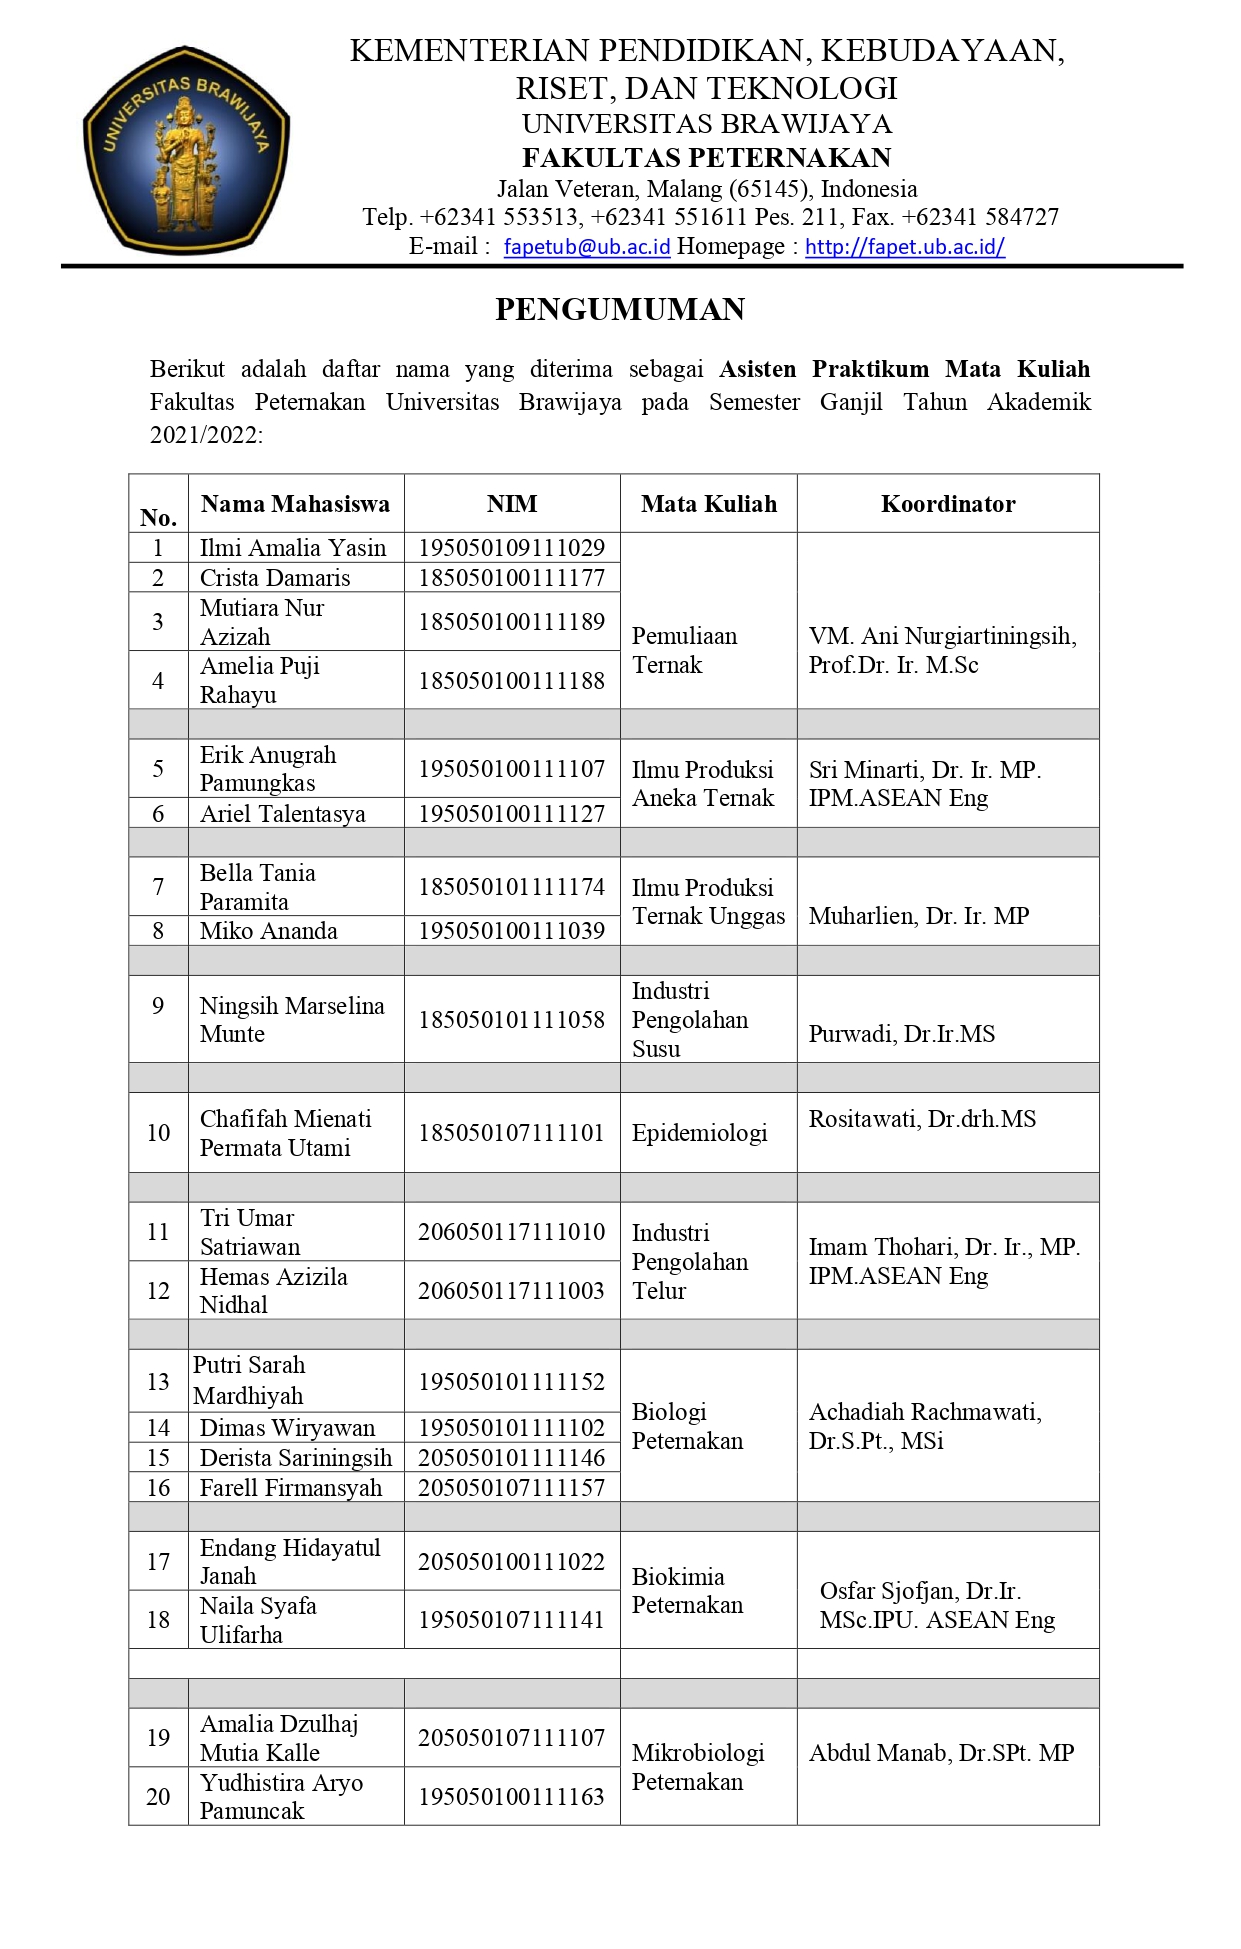 List of Names of Practicum Assistants for Odd Semester Courses for the Academic Year 2021/2022